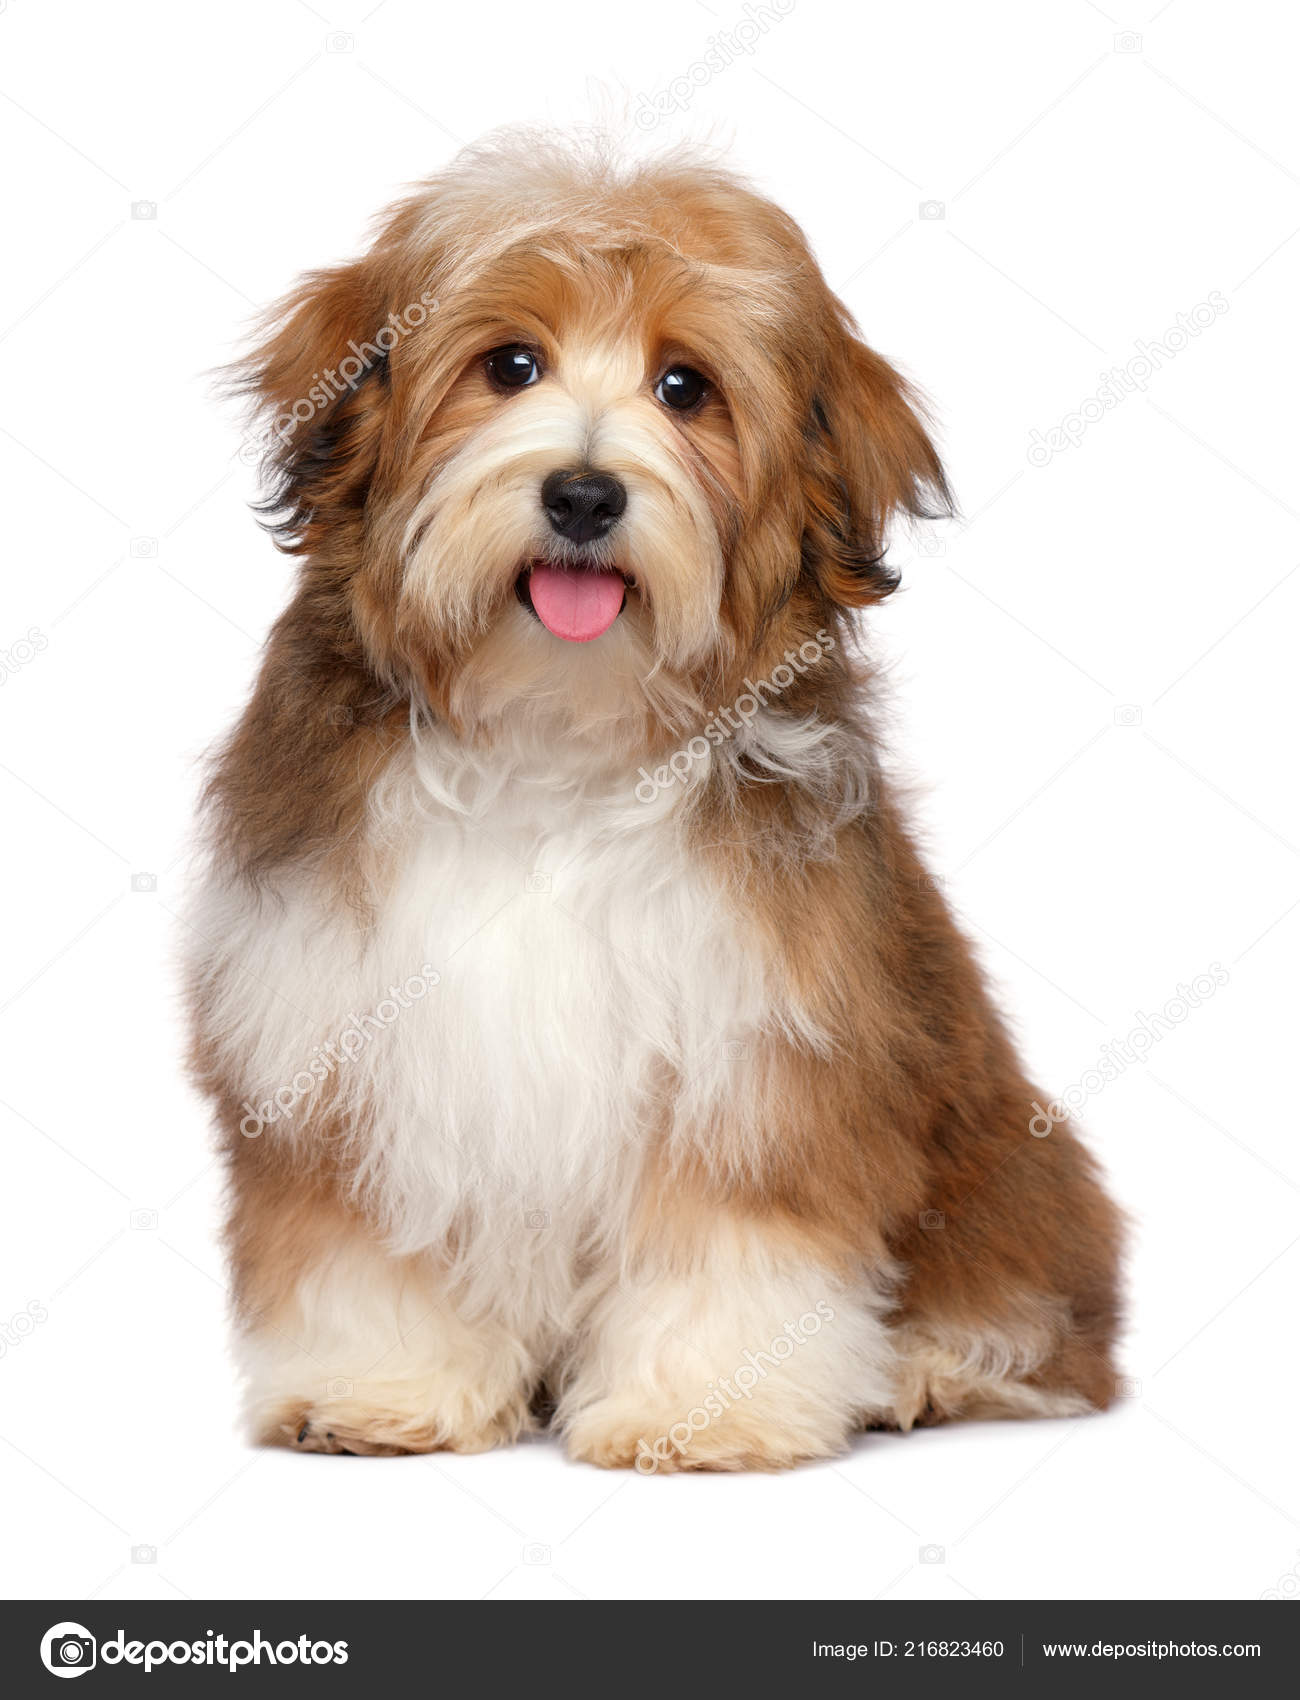 Cute Happy Red Parti Havanese Puppy Dog Looking Stock Photo by 216823460